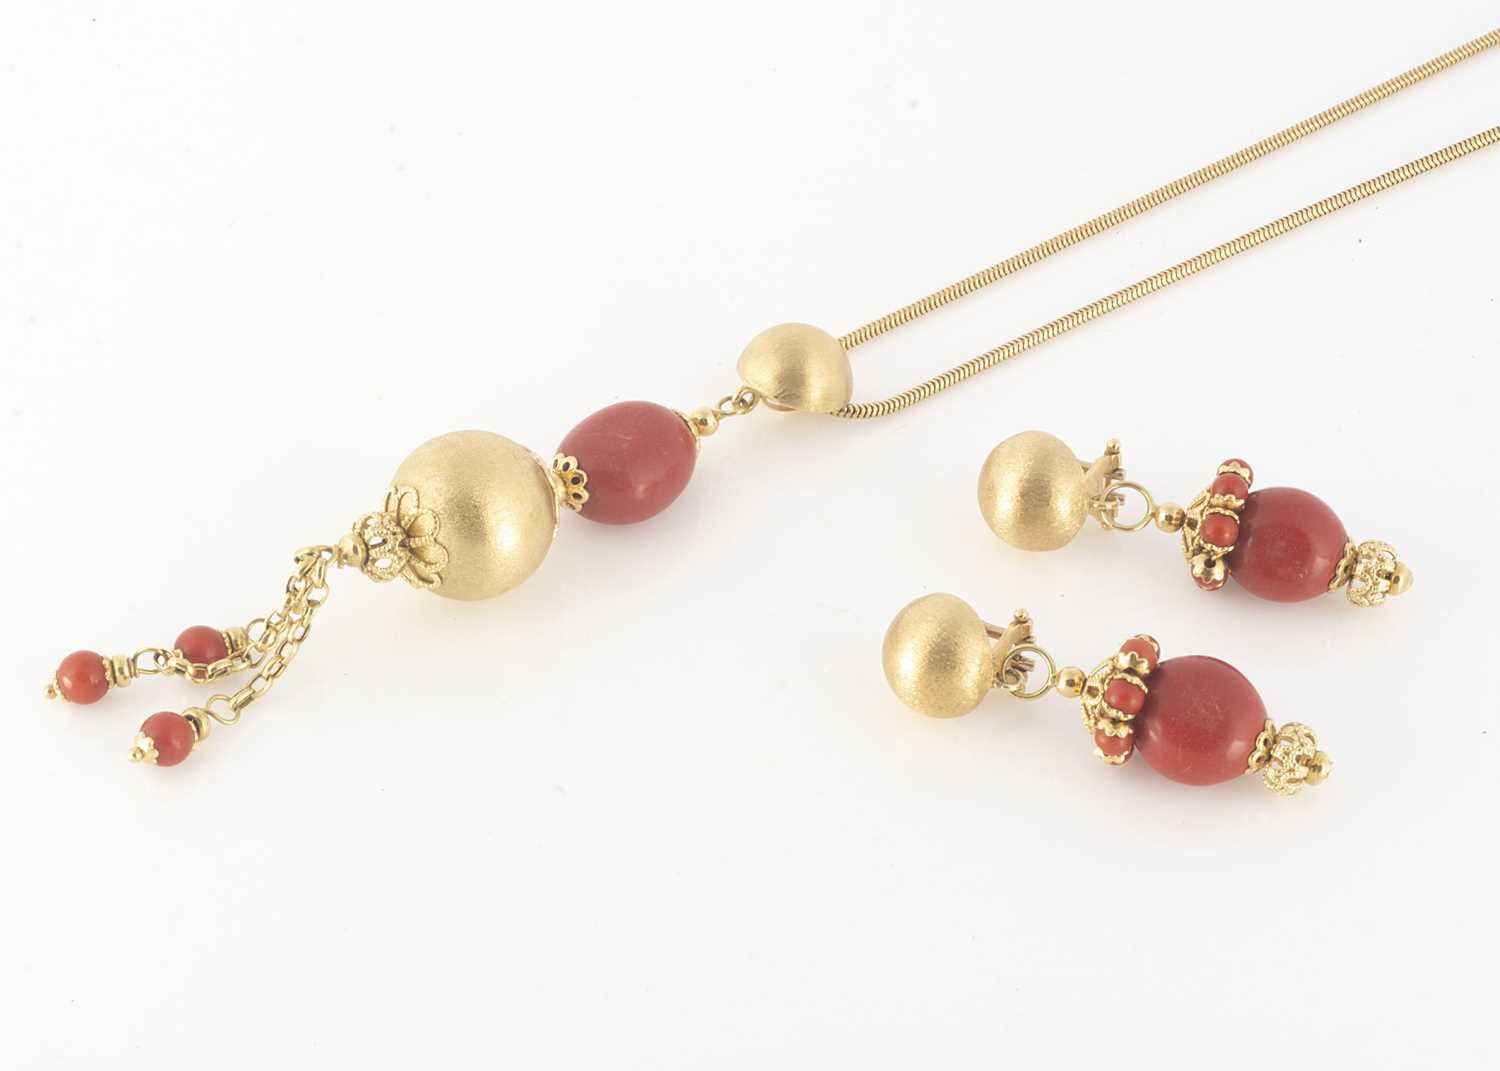 Lot 104 - An Italian 18ct gold and coral necklace and earring set by Di Lombardi Alessandron & Claudio